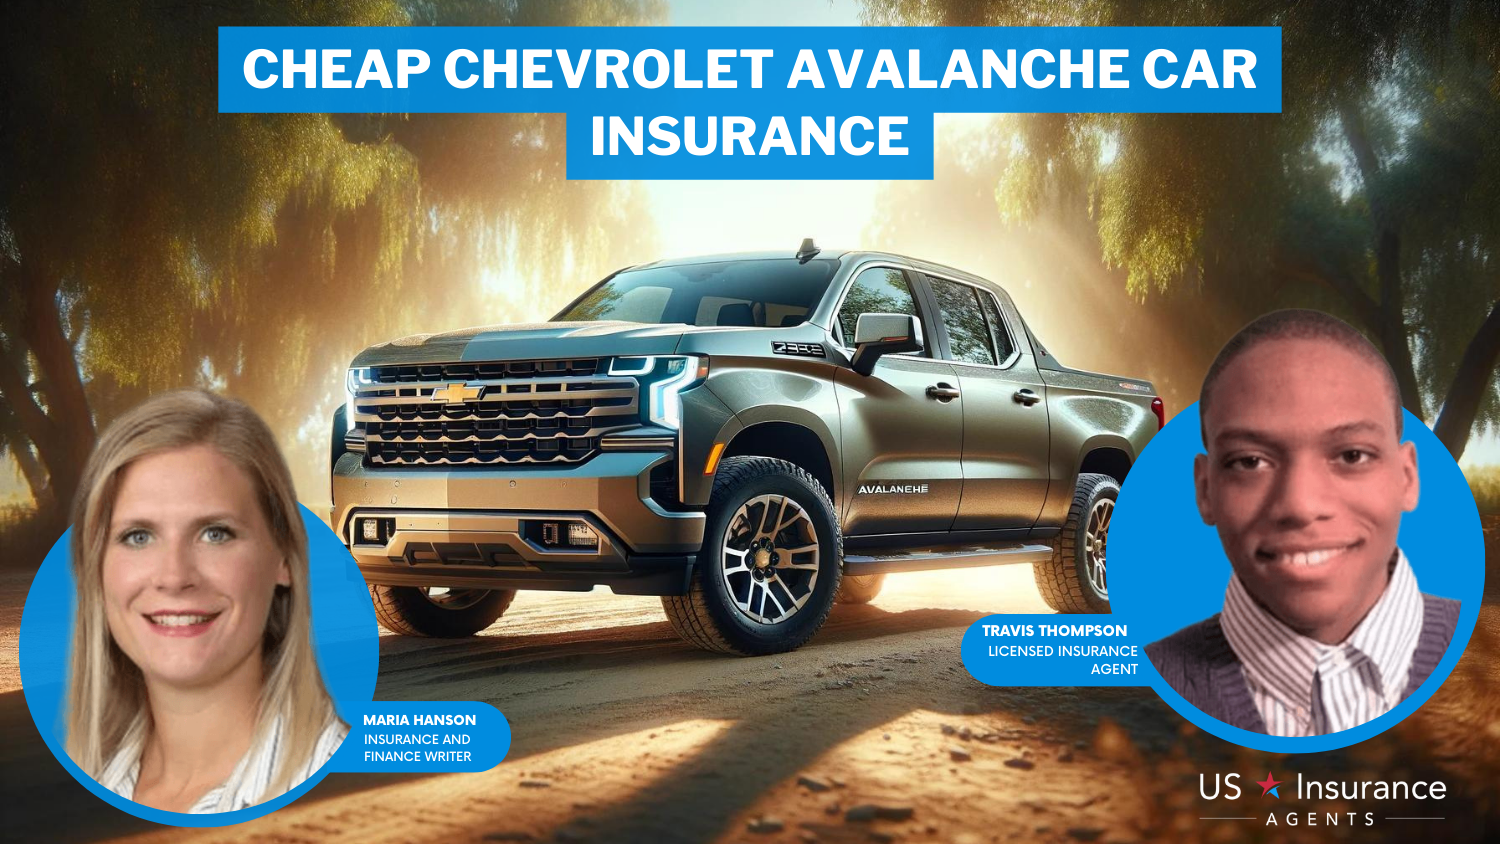 Cheap Chevrolet Avalanche Car Insurance: Erie, Safeco, and AAA.